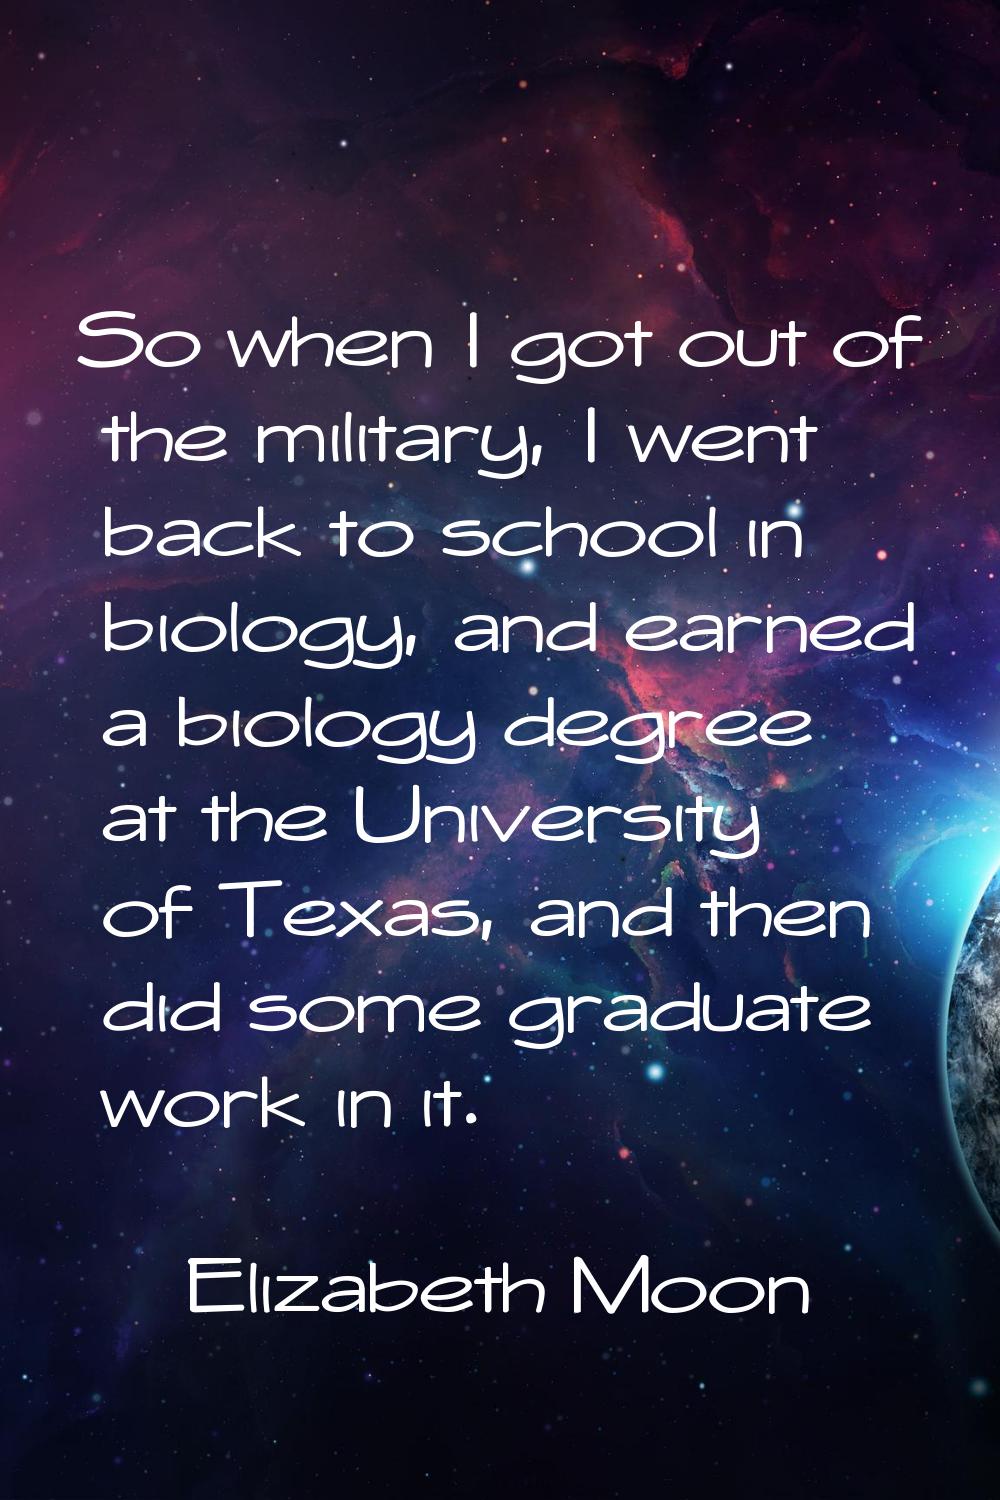 So when I got out of the military, I went back to school in biology, and earned a biology degree at